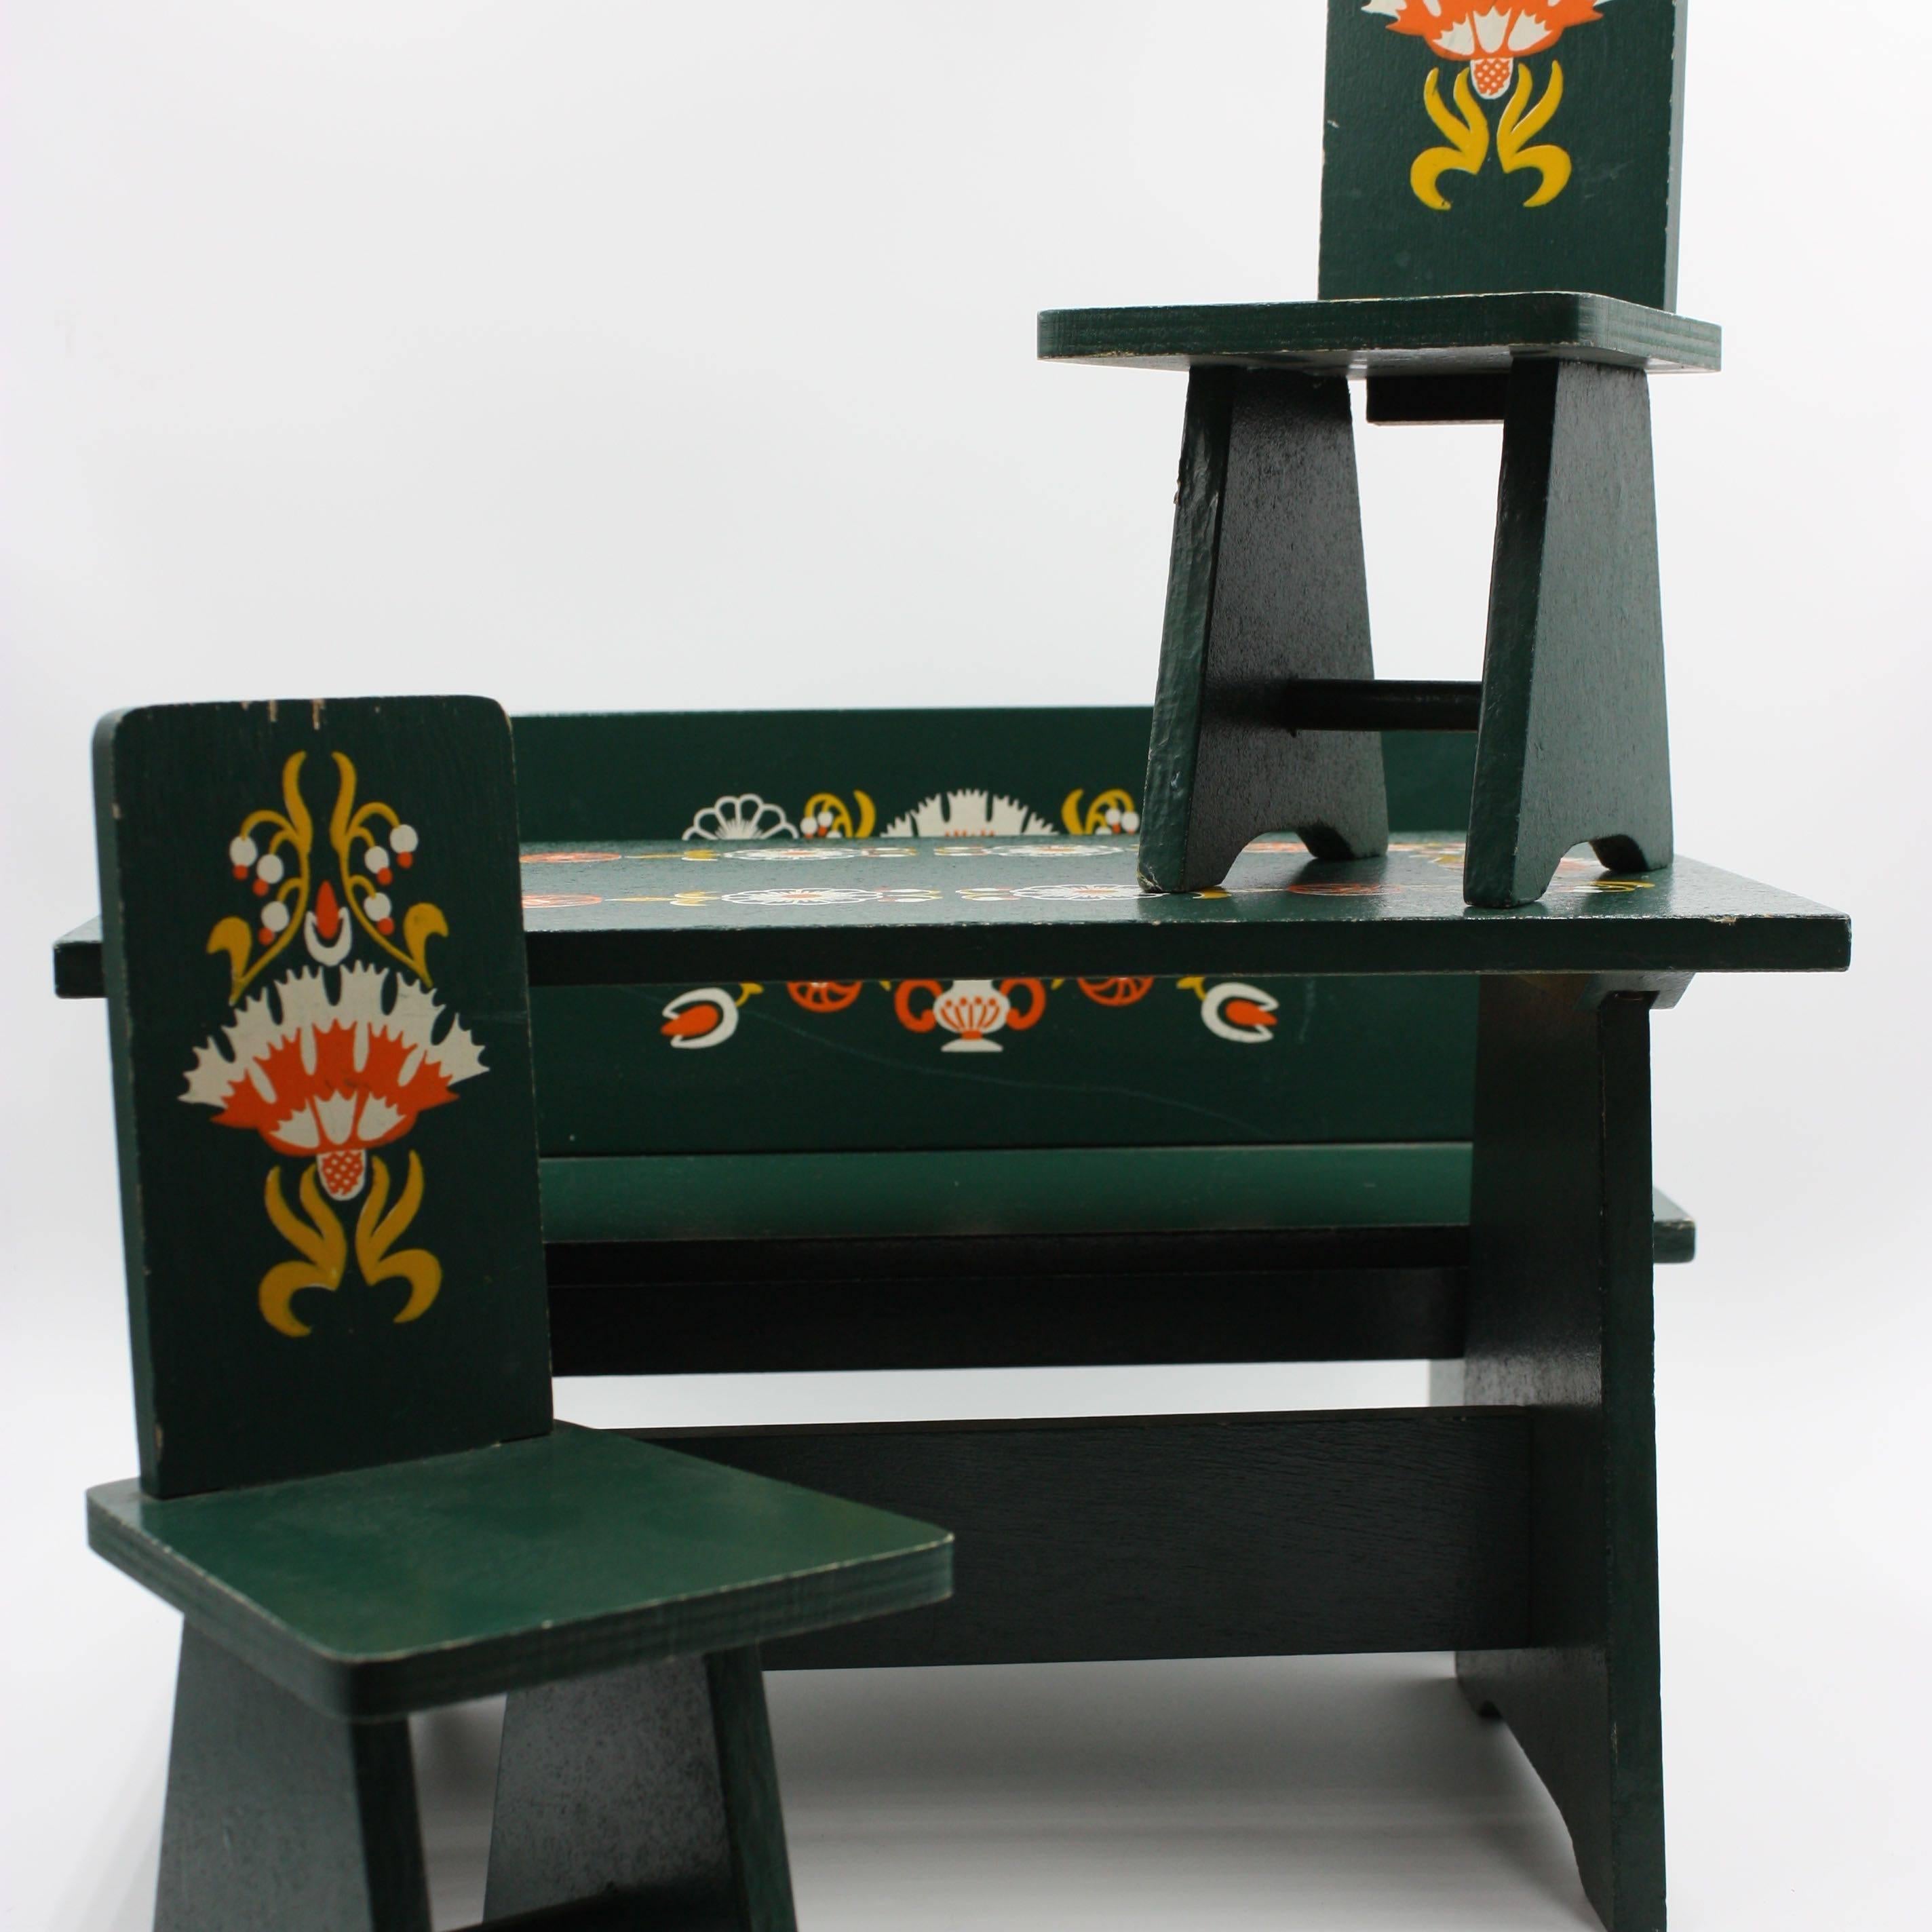 Hand-painted floral motif green dolls furniture from the 1940s in the style of Dora Kuhn.
Complete dining room set with a bench, two chair, table an China cabinet. Chest of drawers and a wardrobe. 
 